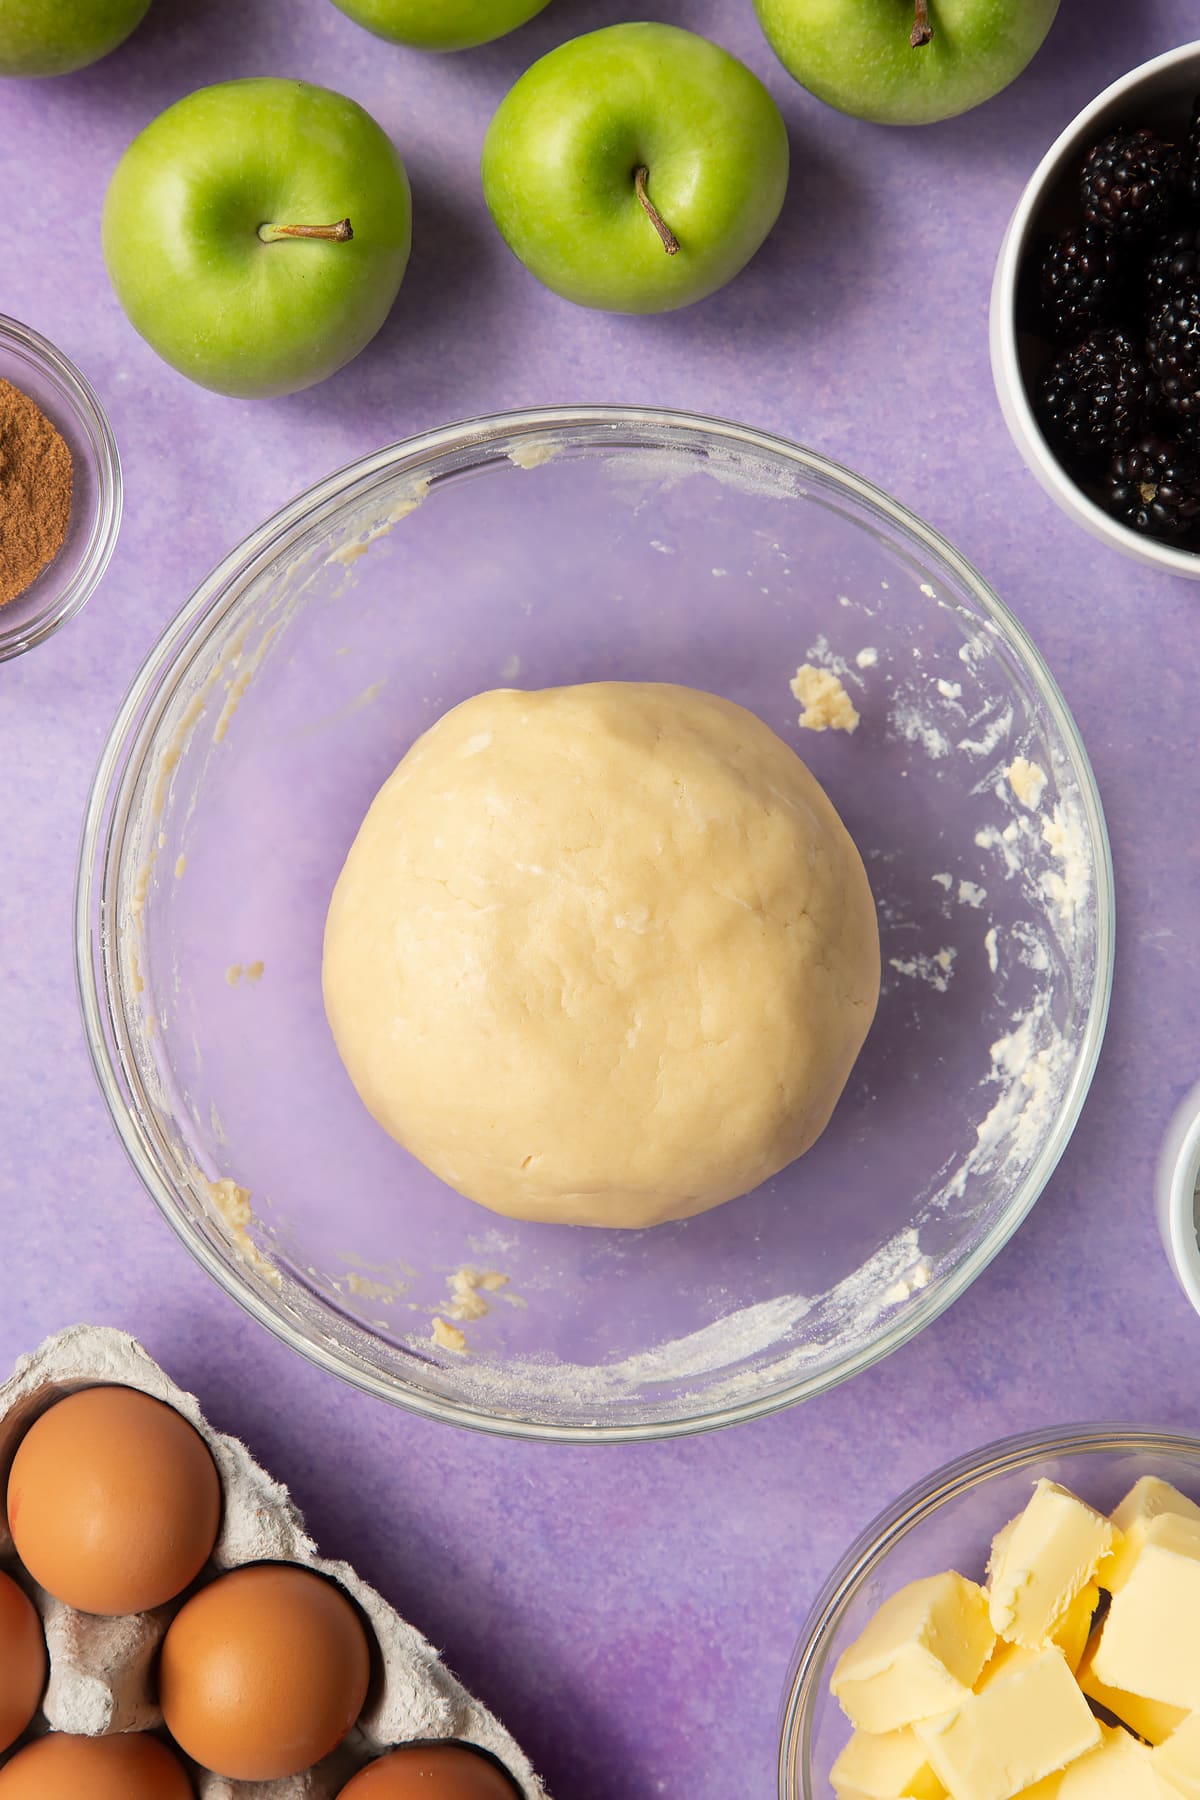 A ball of pastry in a glass mixing bowl. Ingredients to make apple and blackberry pie surround the bowl.